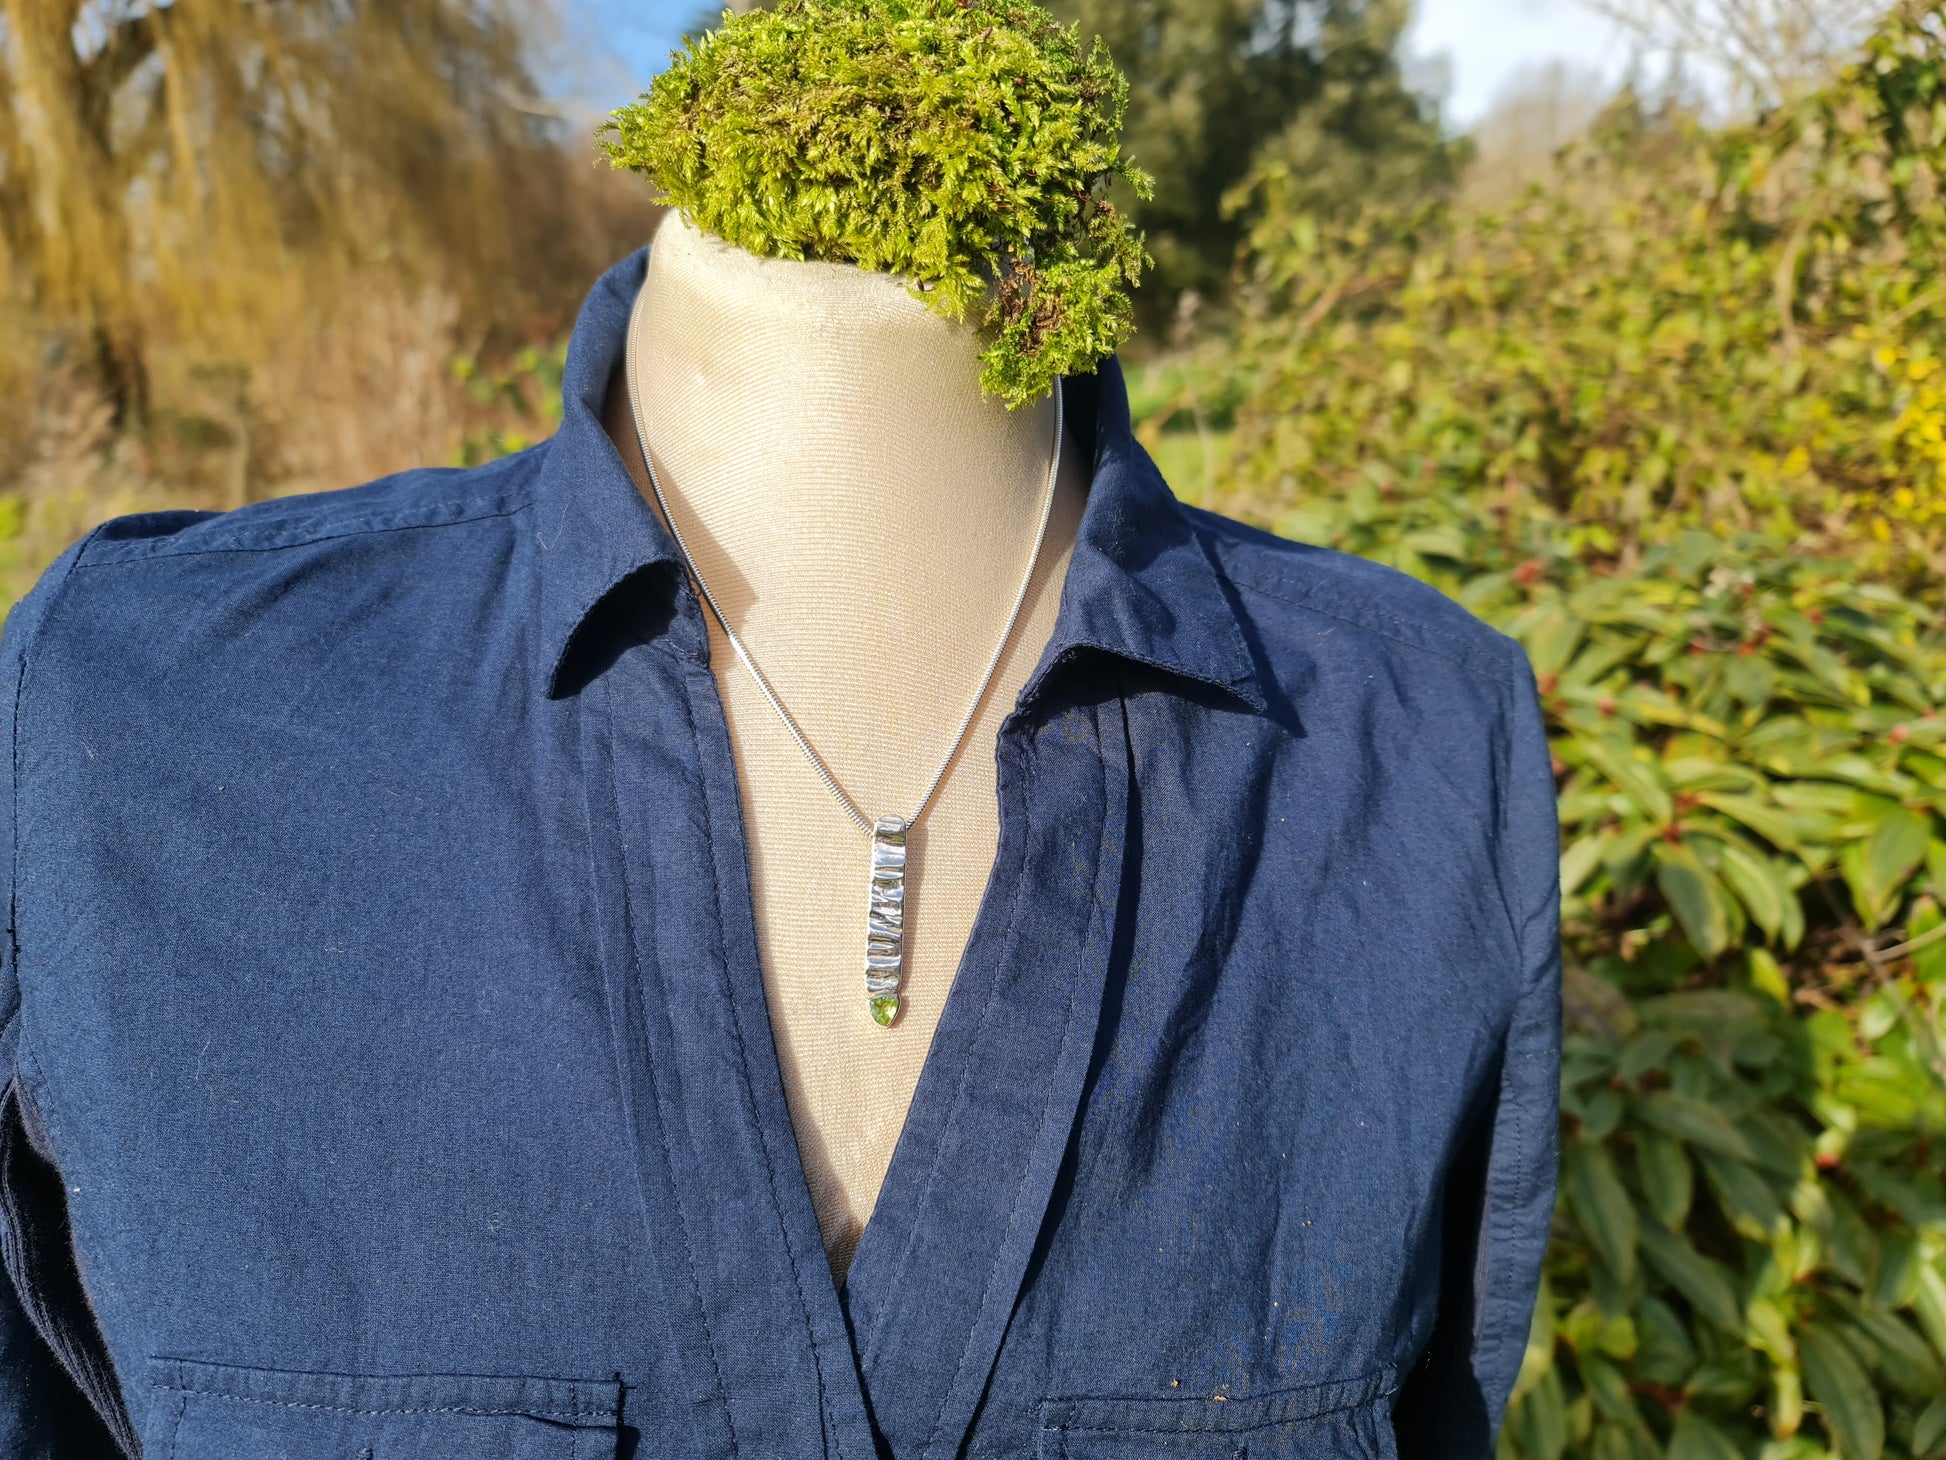 Tree Bark textured sterling silver rectangular pendant with a bright green triangular peridot at the bottom of the pendant.  The pendant is on a mannequin with a blue shirt and set in a garden scene.